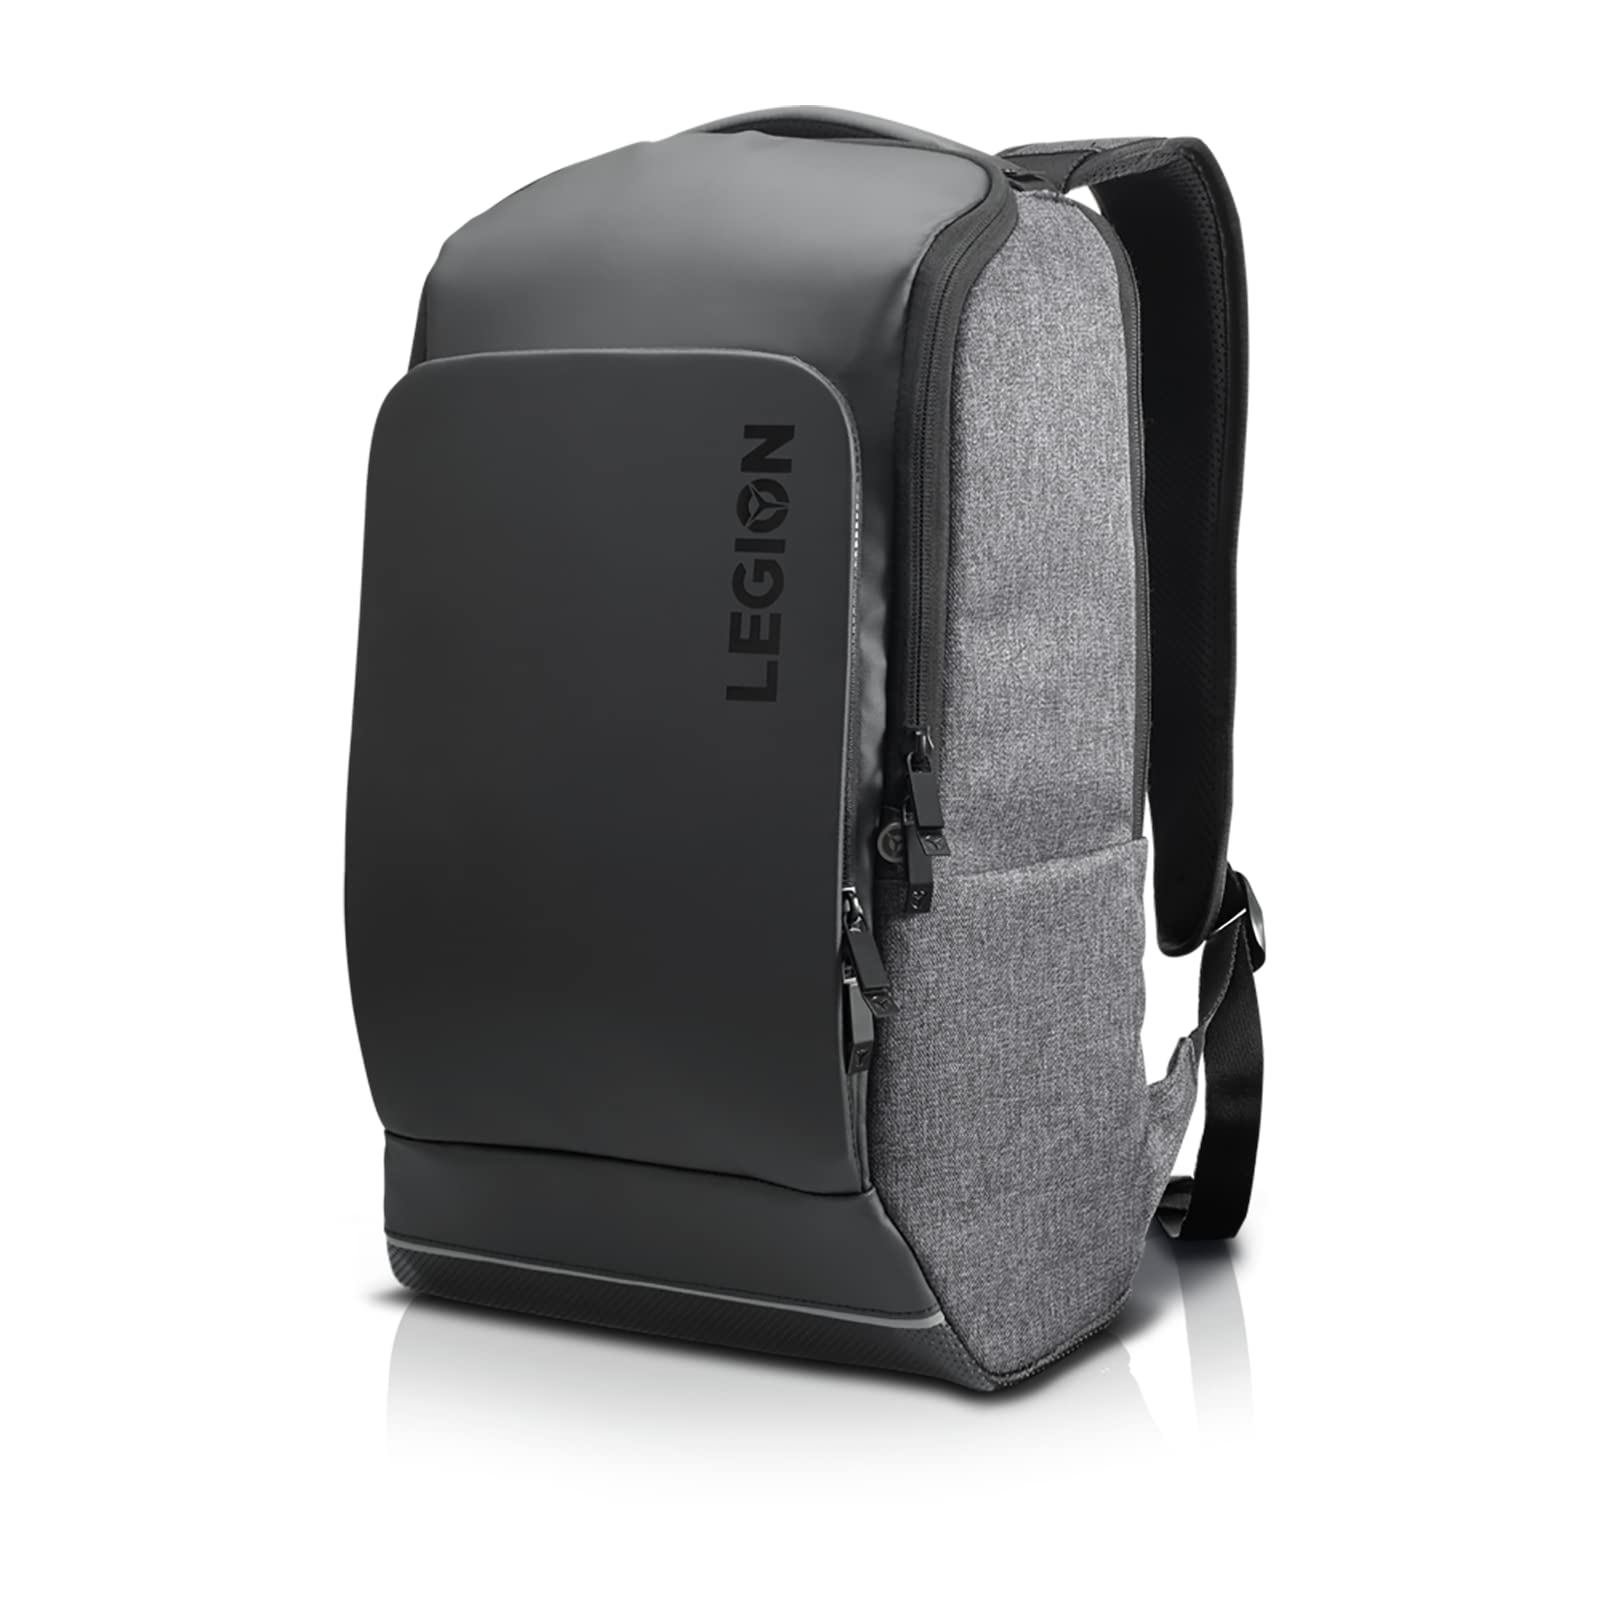 Lenovo Legion Recon 15.6 inch Gaming Backpack, sleek, modern, lightweight, water-repellent front panel, breathable back padding, for gamers, causal or college students, GX40S69333